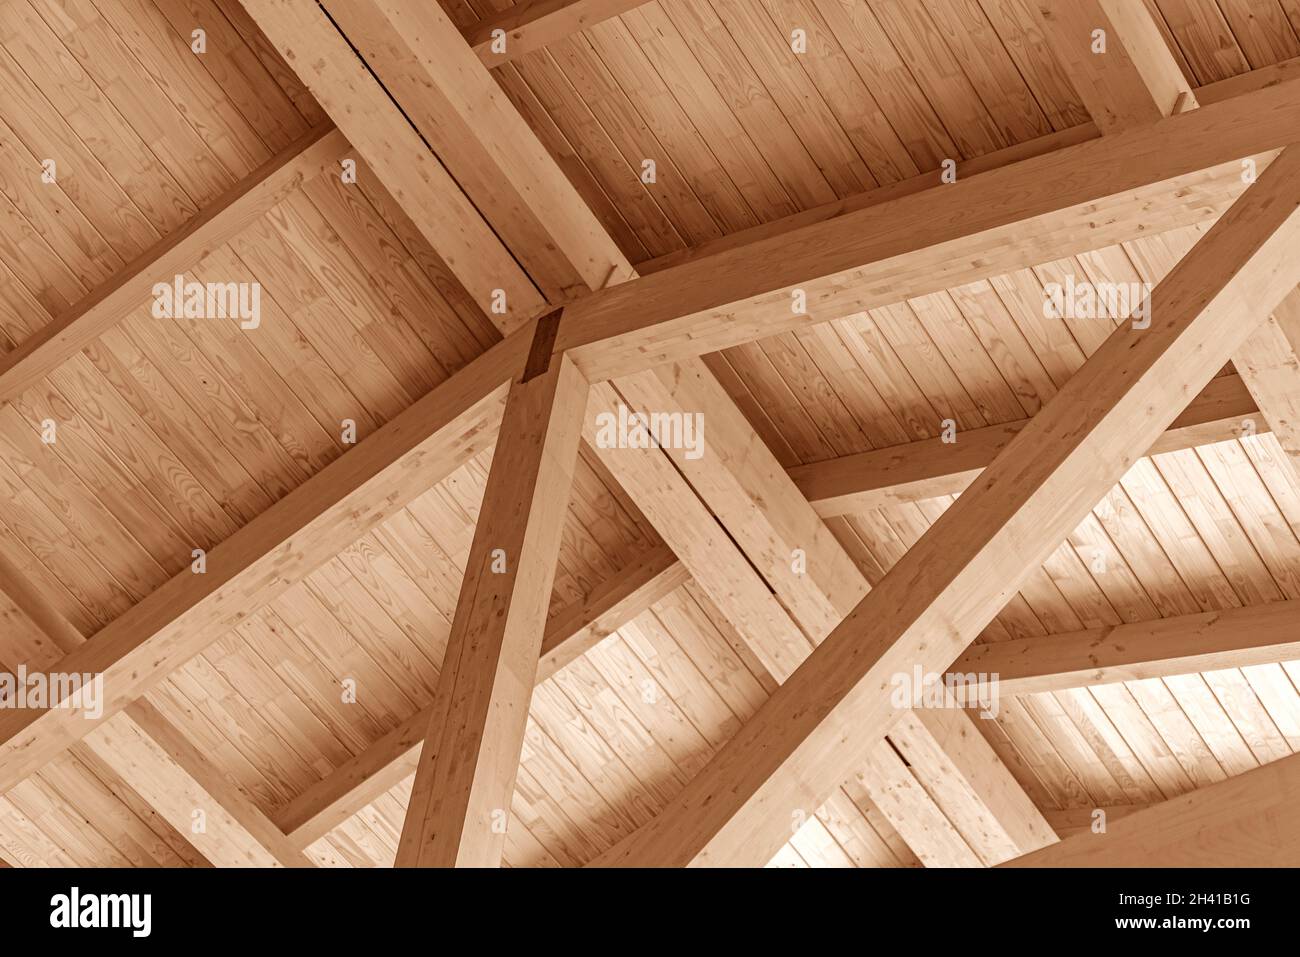 Wooden roof construction. Overlapping a wooden house. Stock Photo